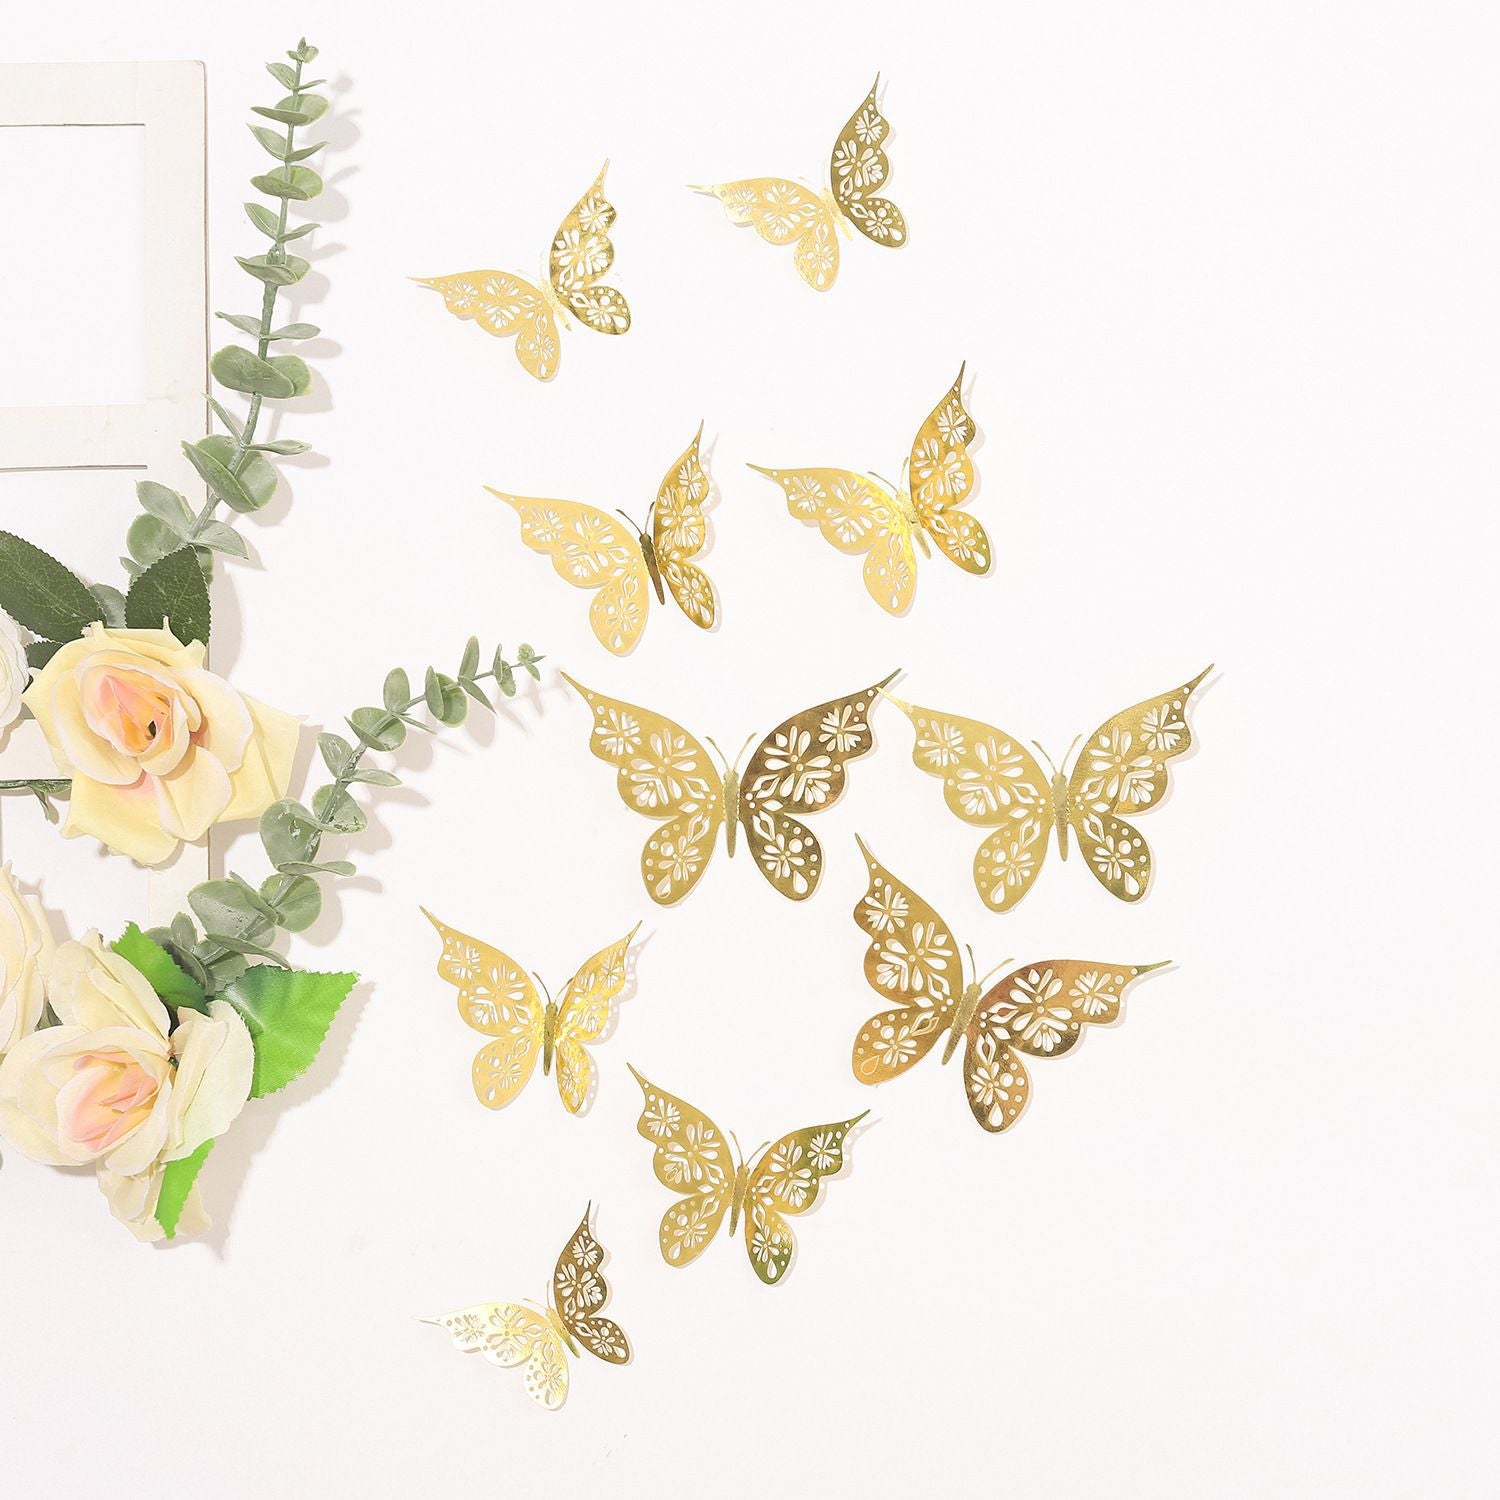 Bulk 24PCS 3D Butterfly Wall Decals DIY Mural Stickers Birthday Wedding Party Cake Decorations Wholesale